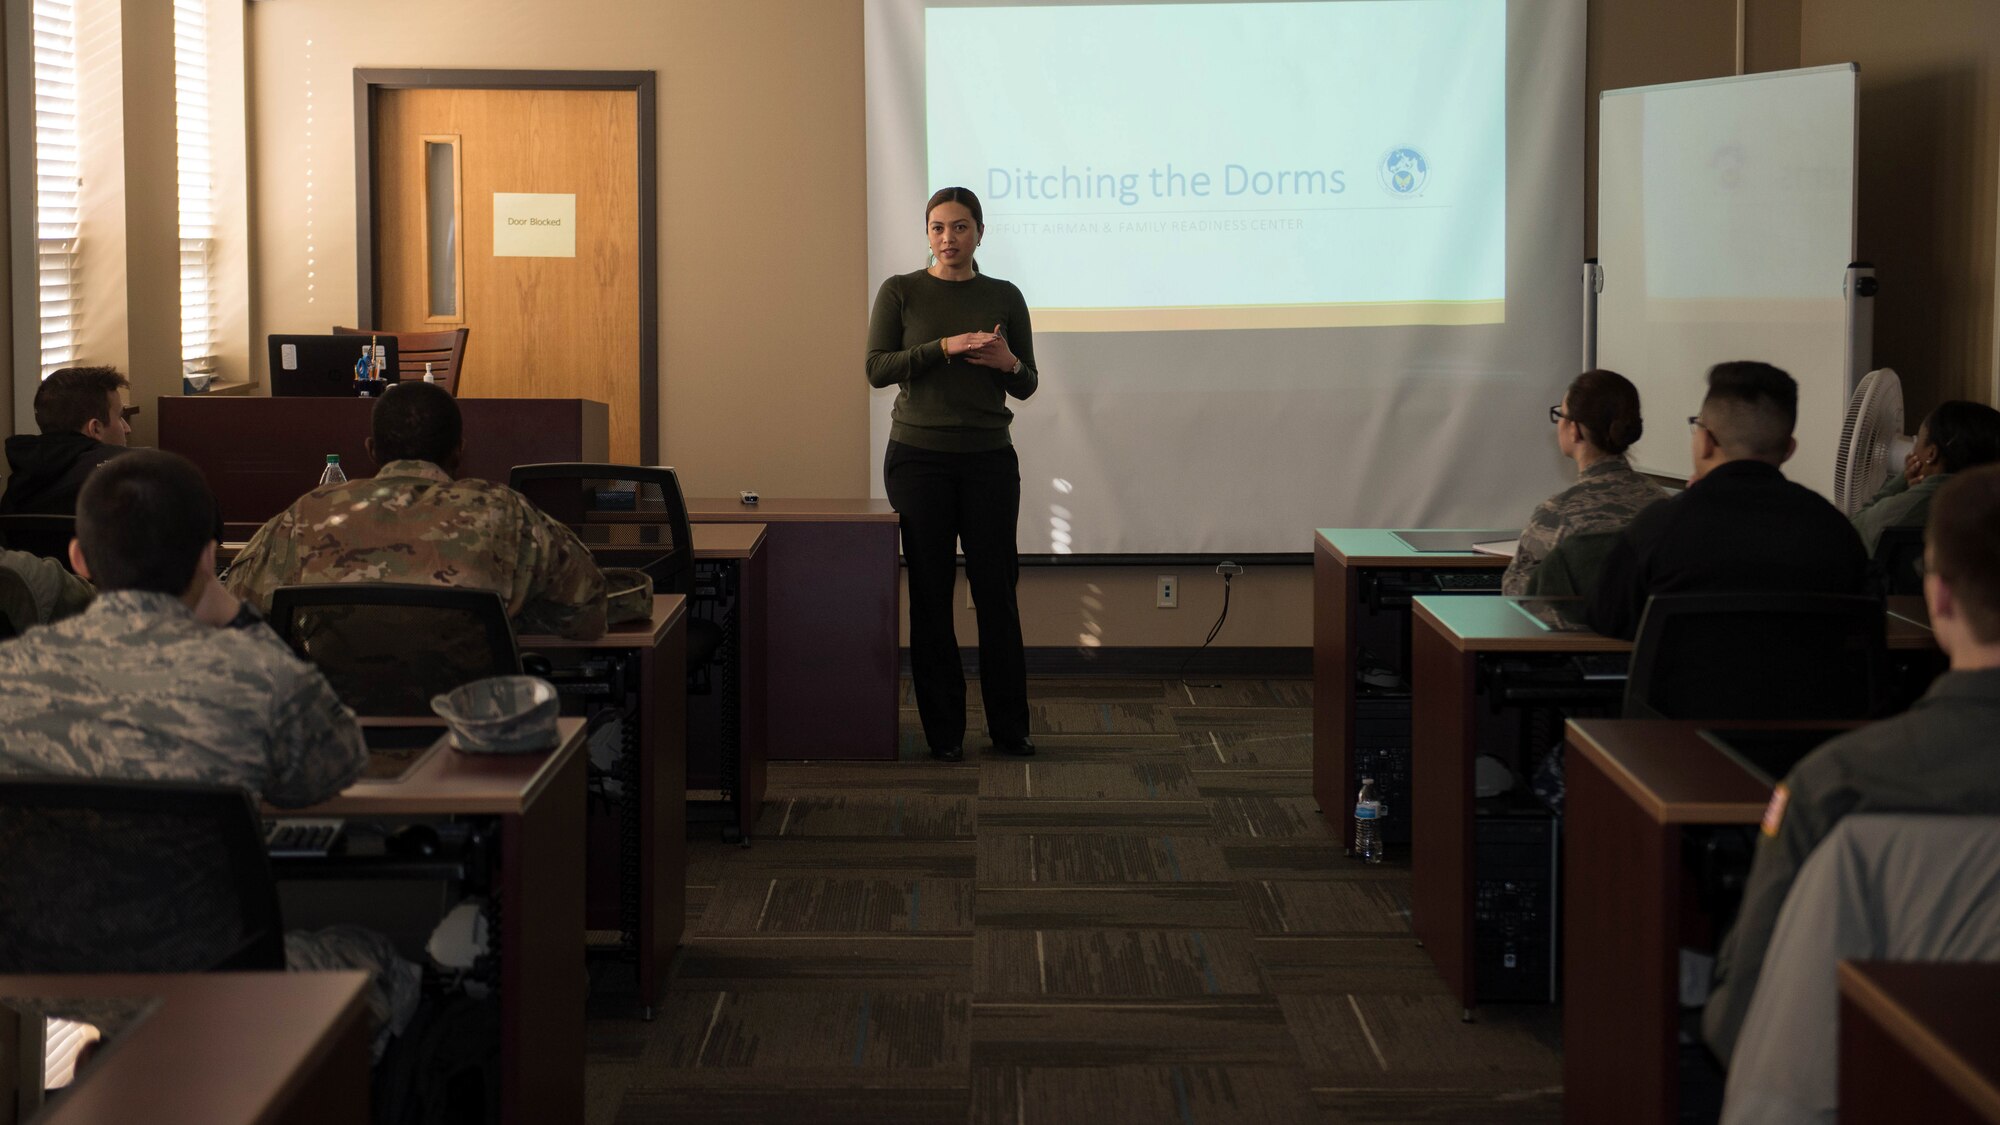 Chryzelle Cabrillas-Harris, Airman and Family Readiness Center community readiness consultant, teaches the workshop, "Ditching the Dorms," Jan. 11, 2019, at Offutt Air Force Base, Nebraska. The course helps service members moving out of the base dormitories. (U.S. Air Force photo by Zachary Hada)